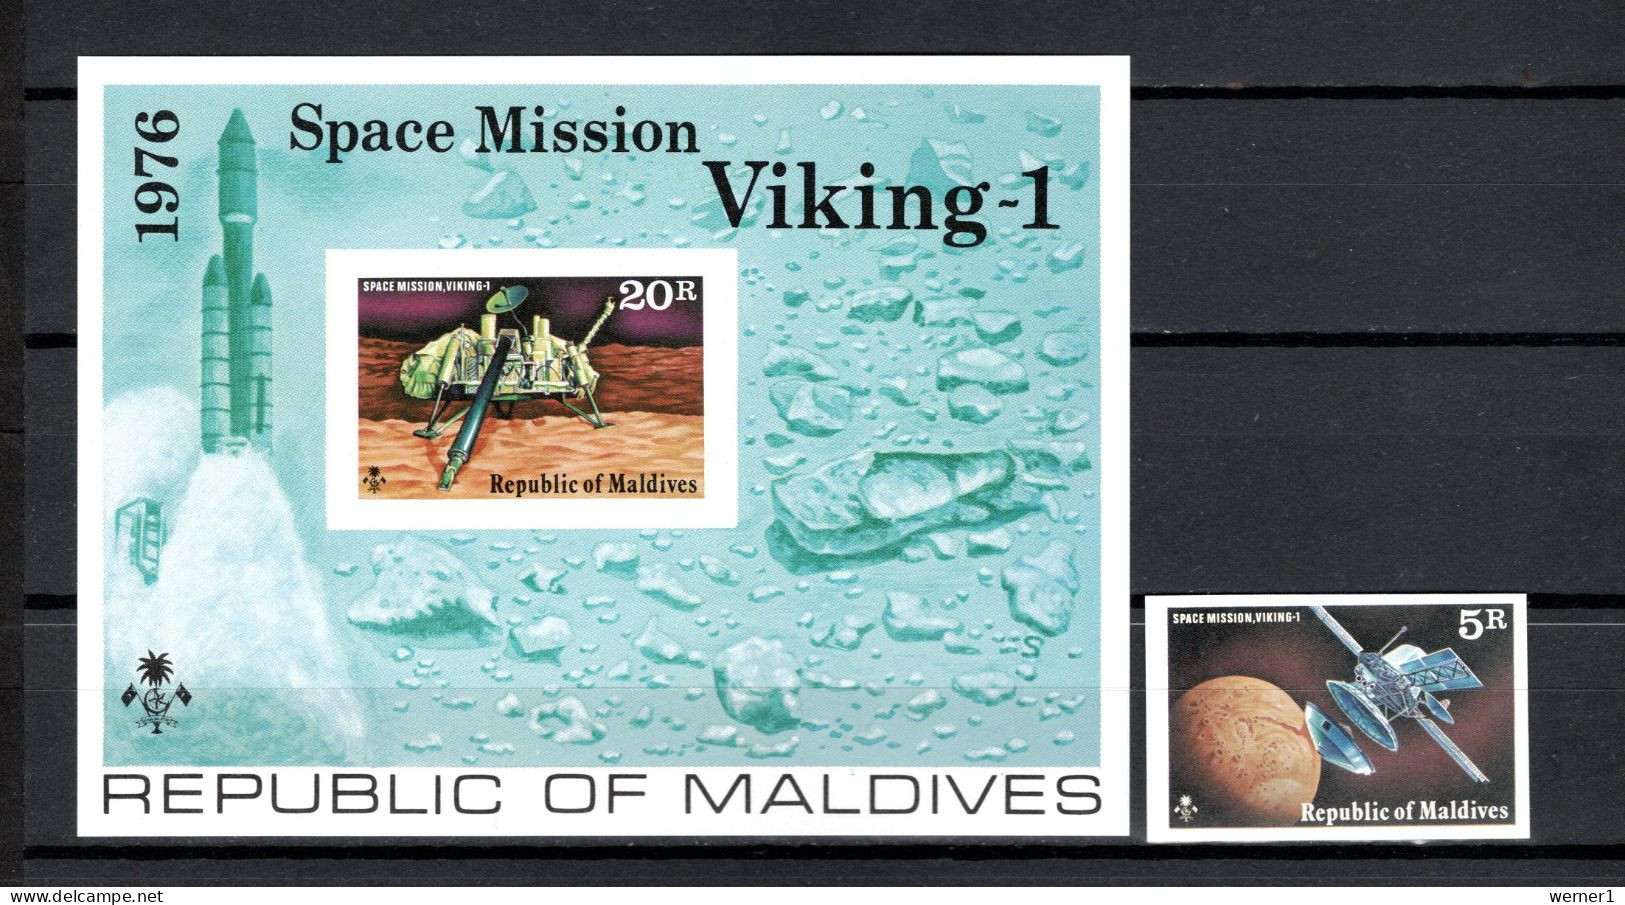 Maldives 1976 Space Viking Stamp + S/s Imperf. MNH -scarce- - Asie